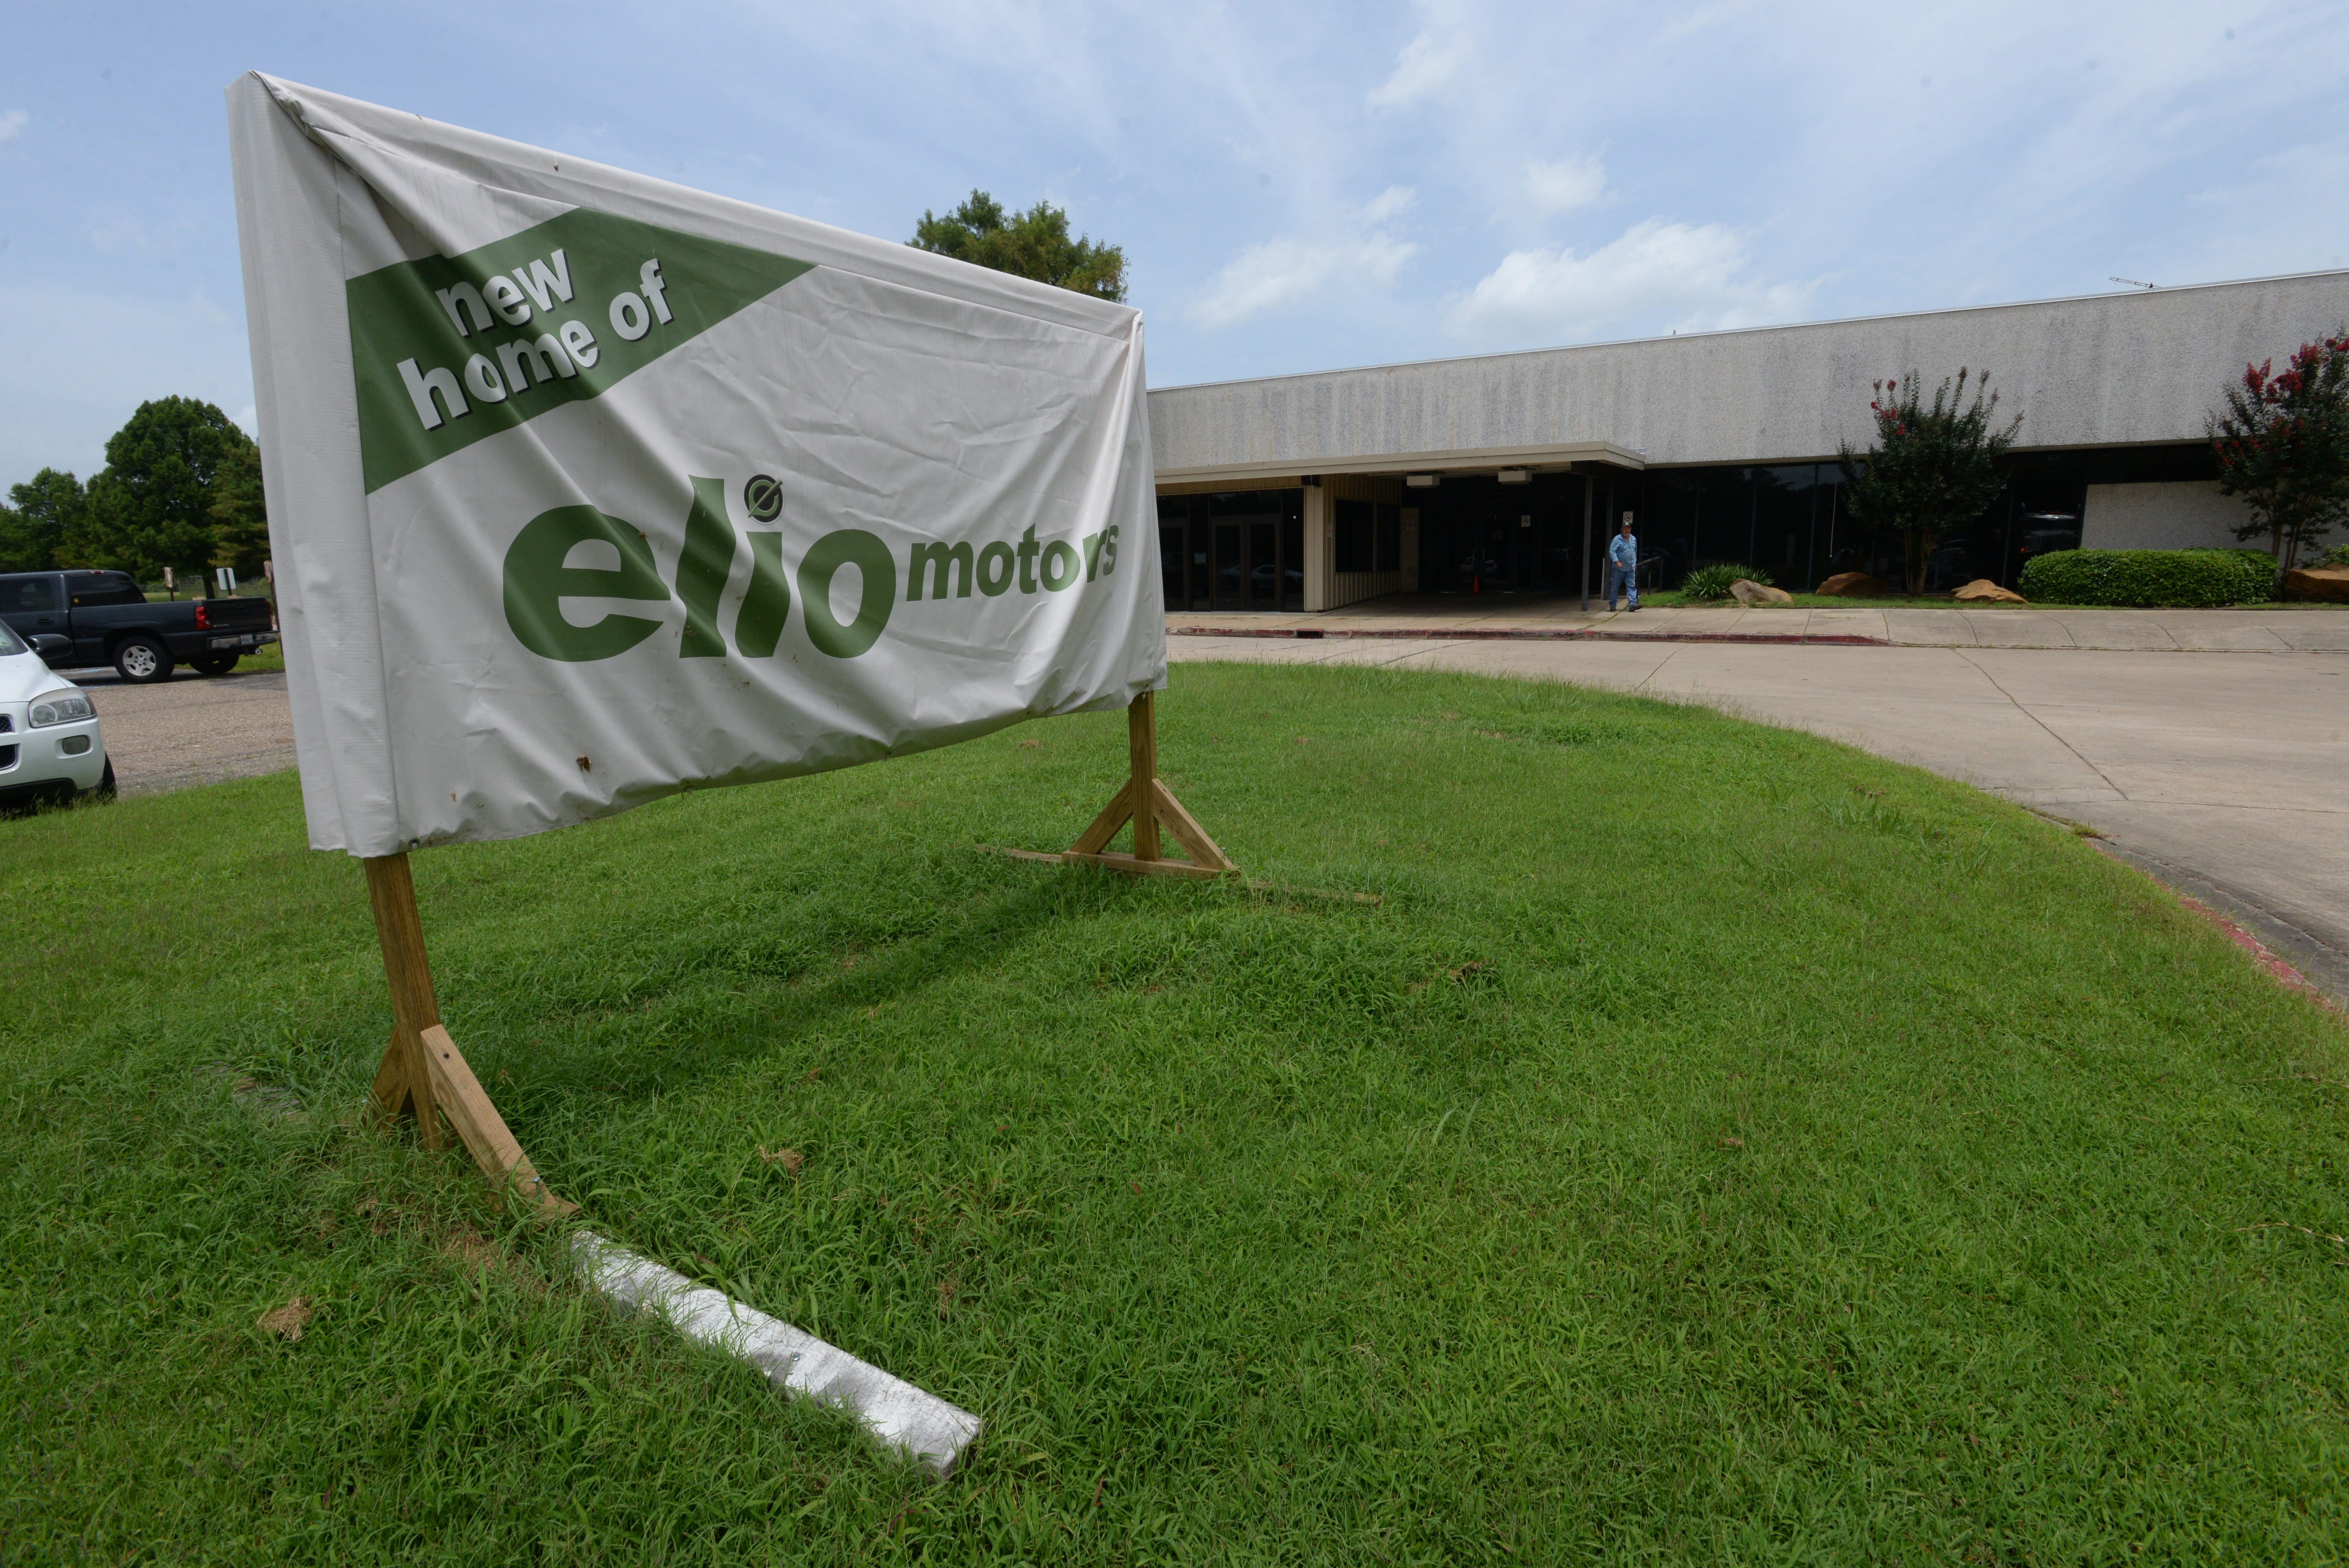 Elio Motors is set to move into the former GM plant on General Motors Blvd.